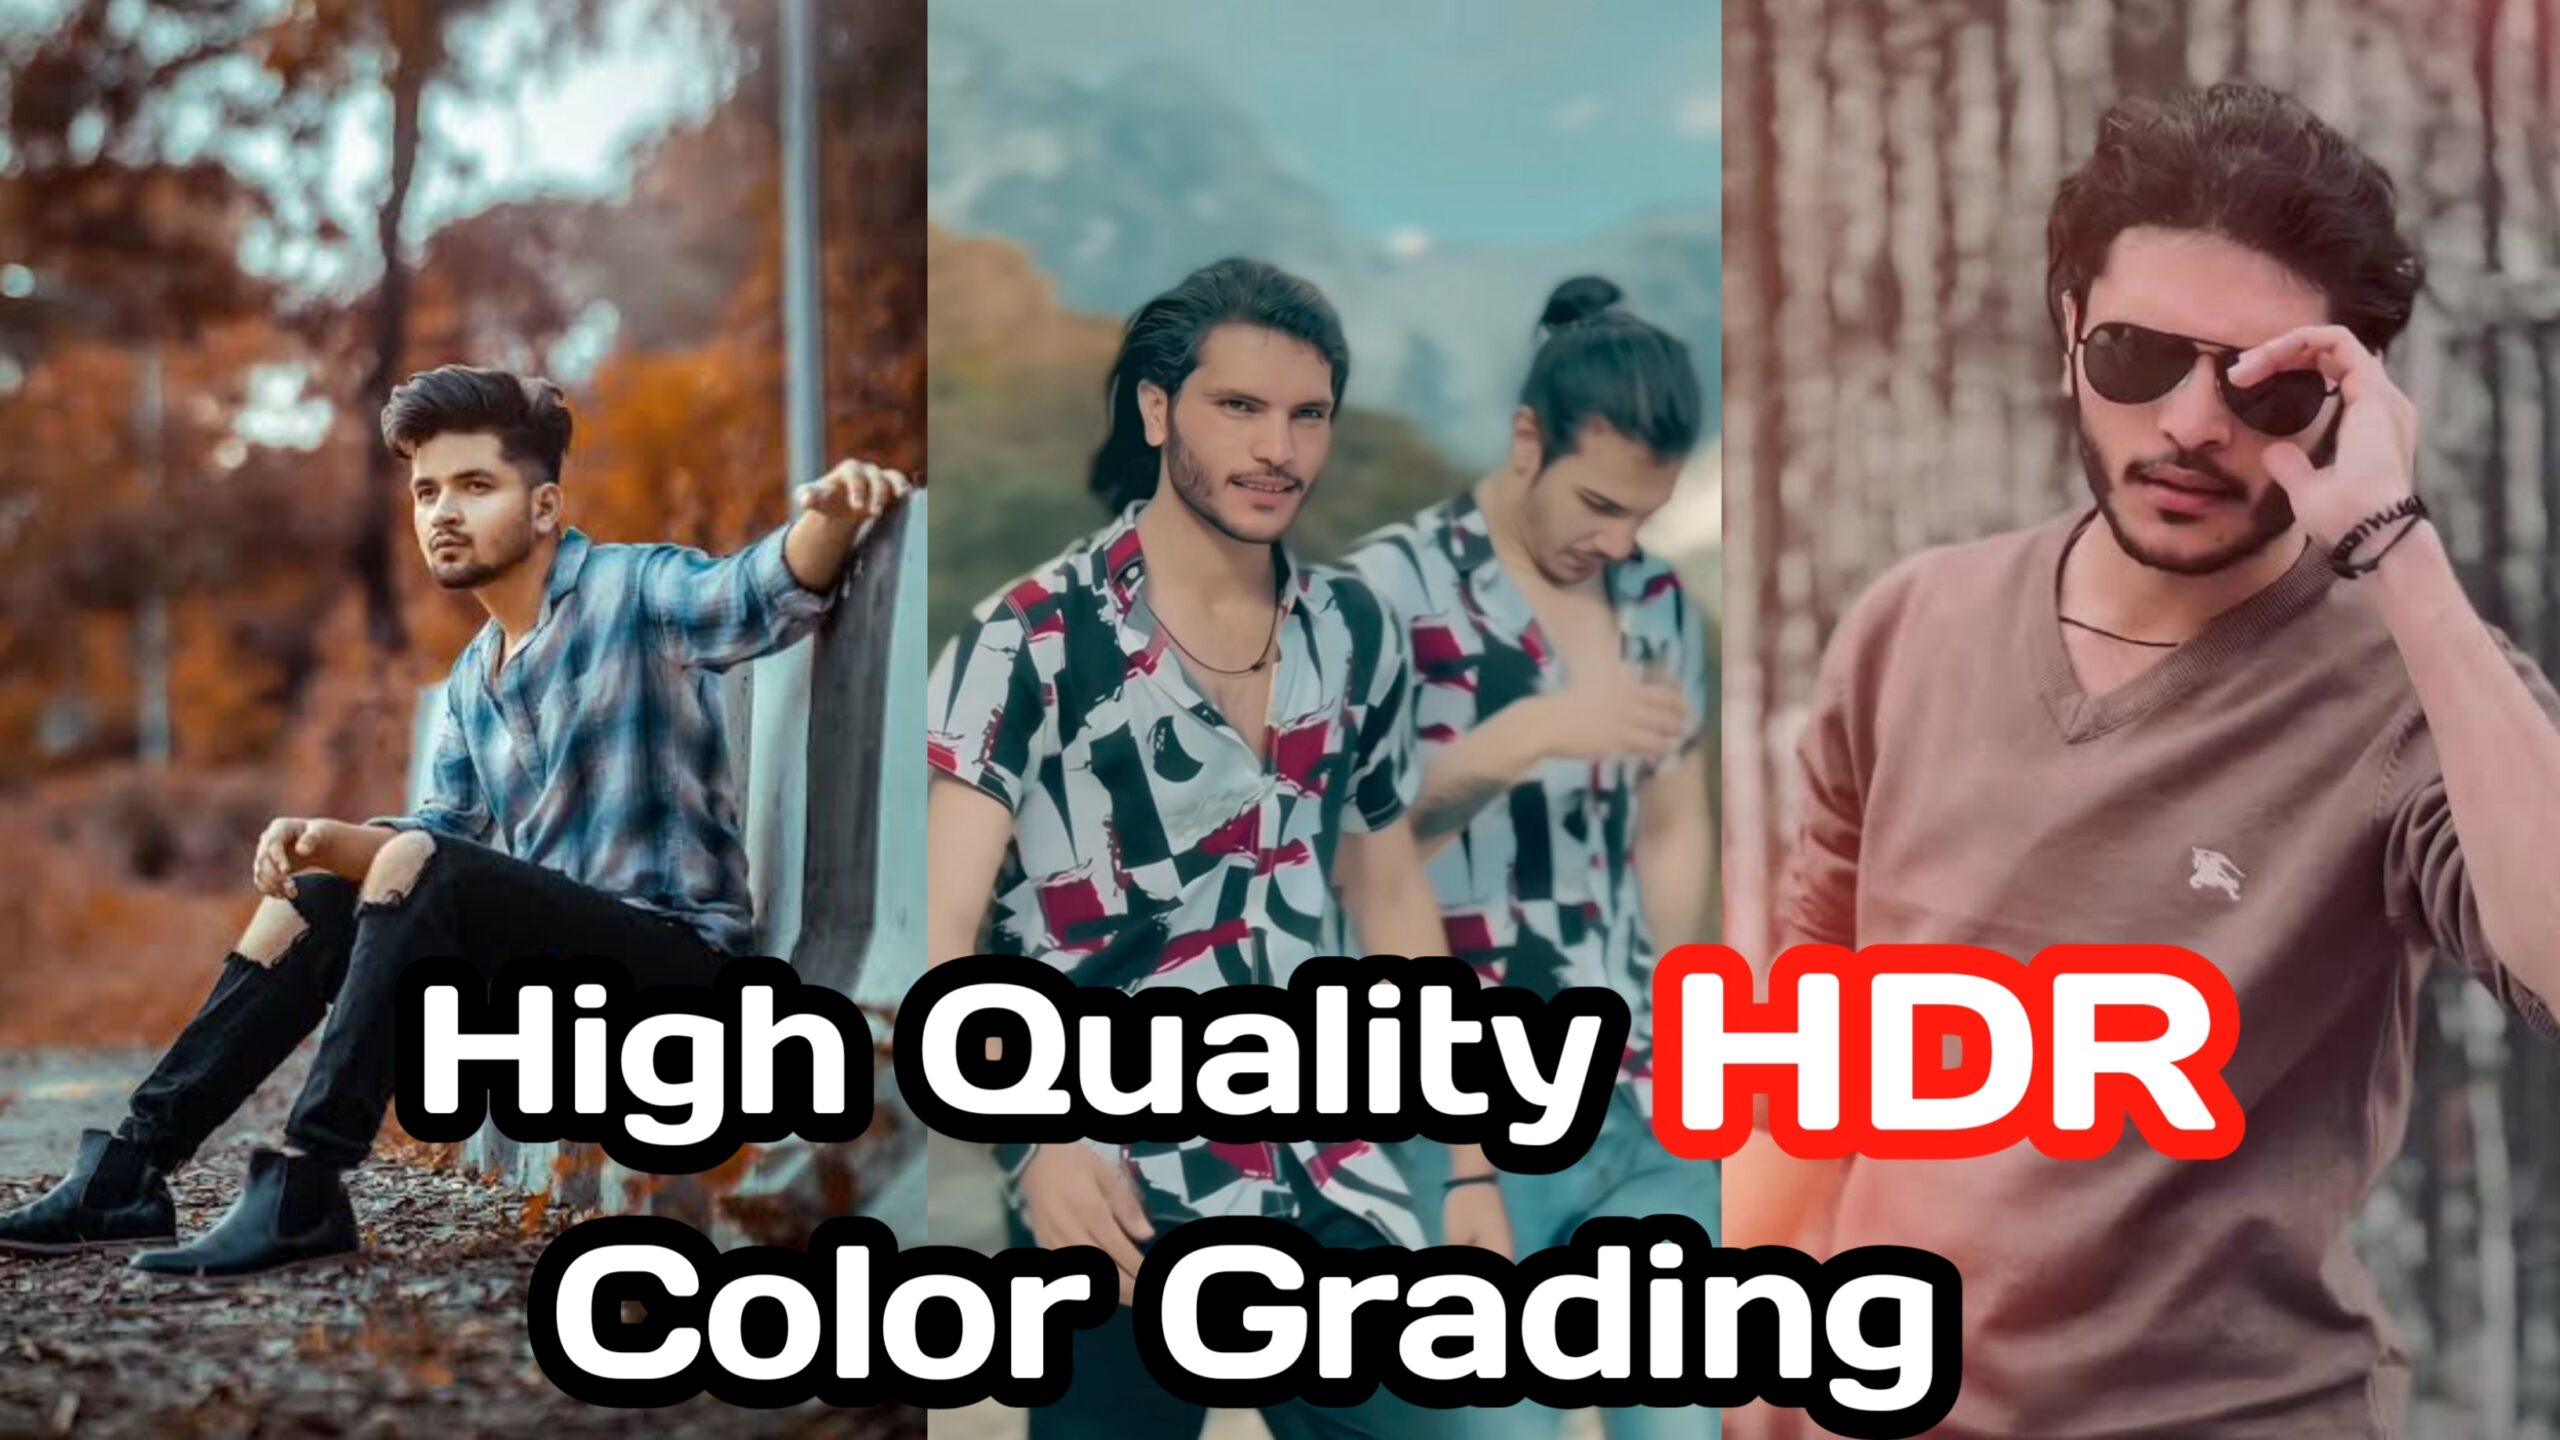 How to do HDR editing with high quality color grading